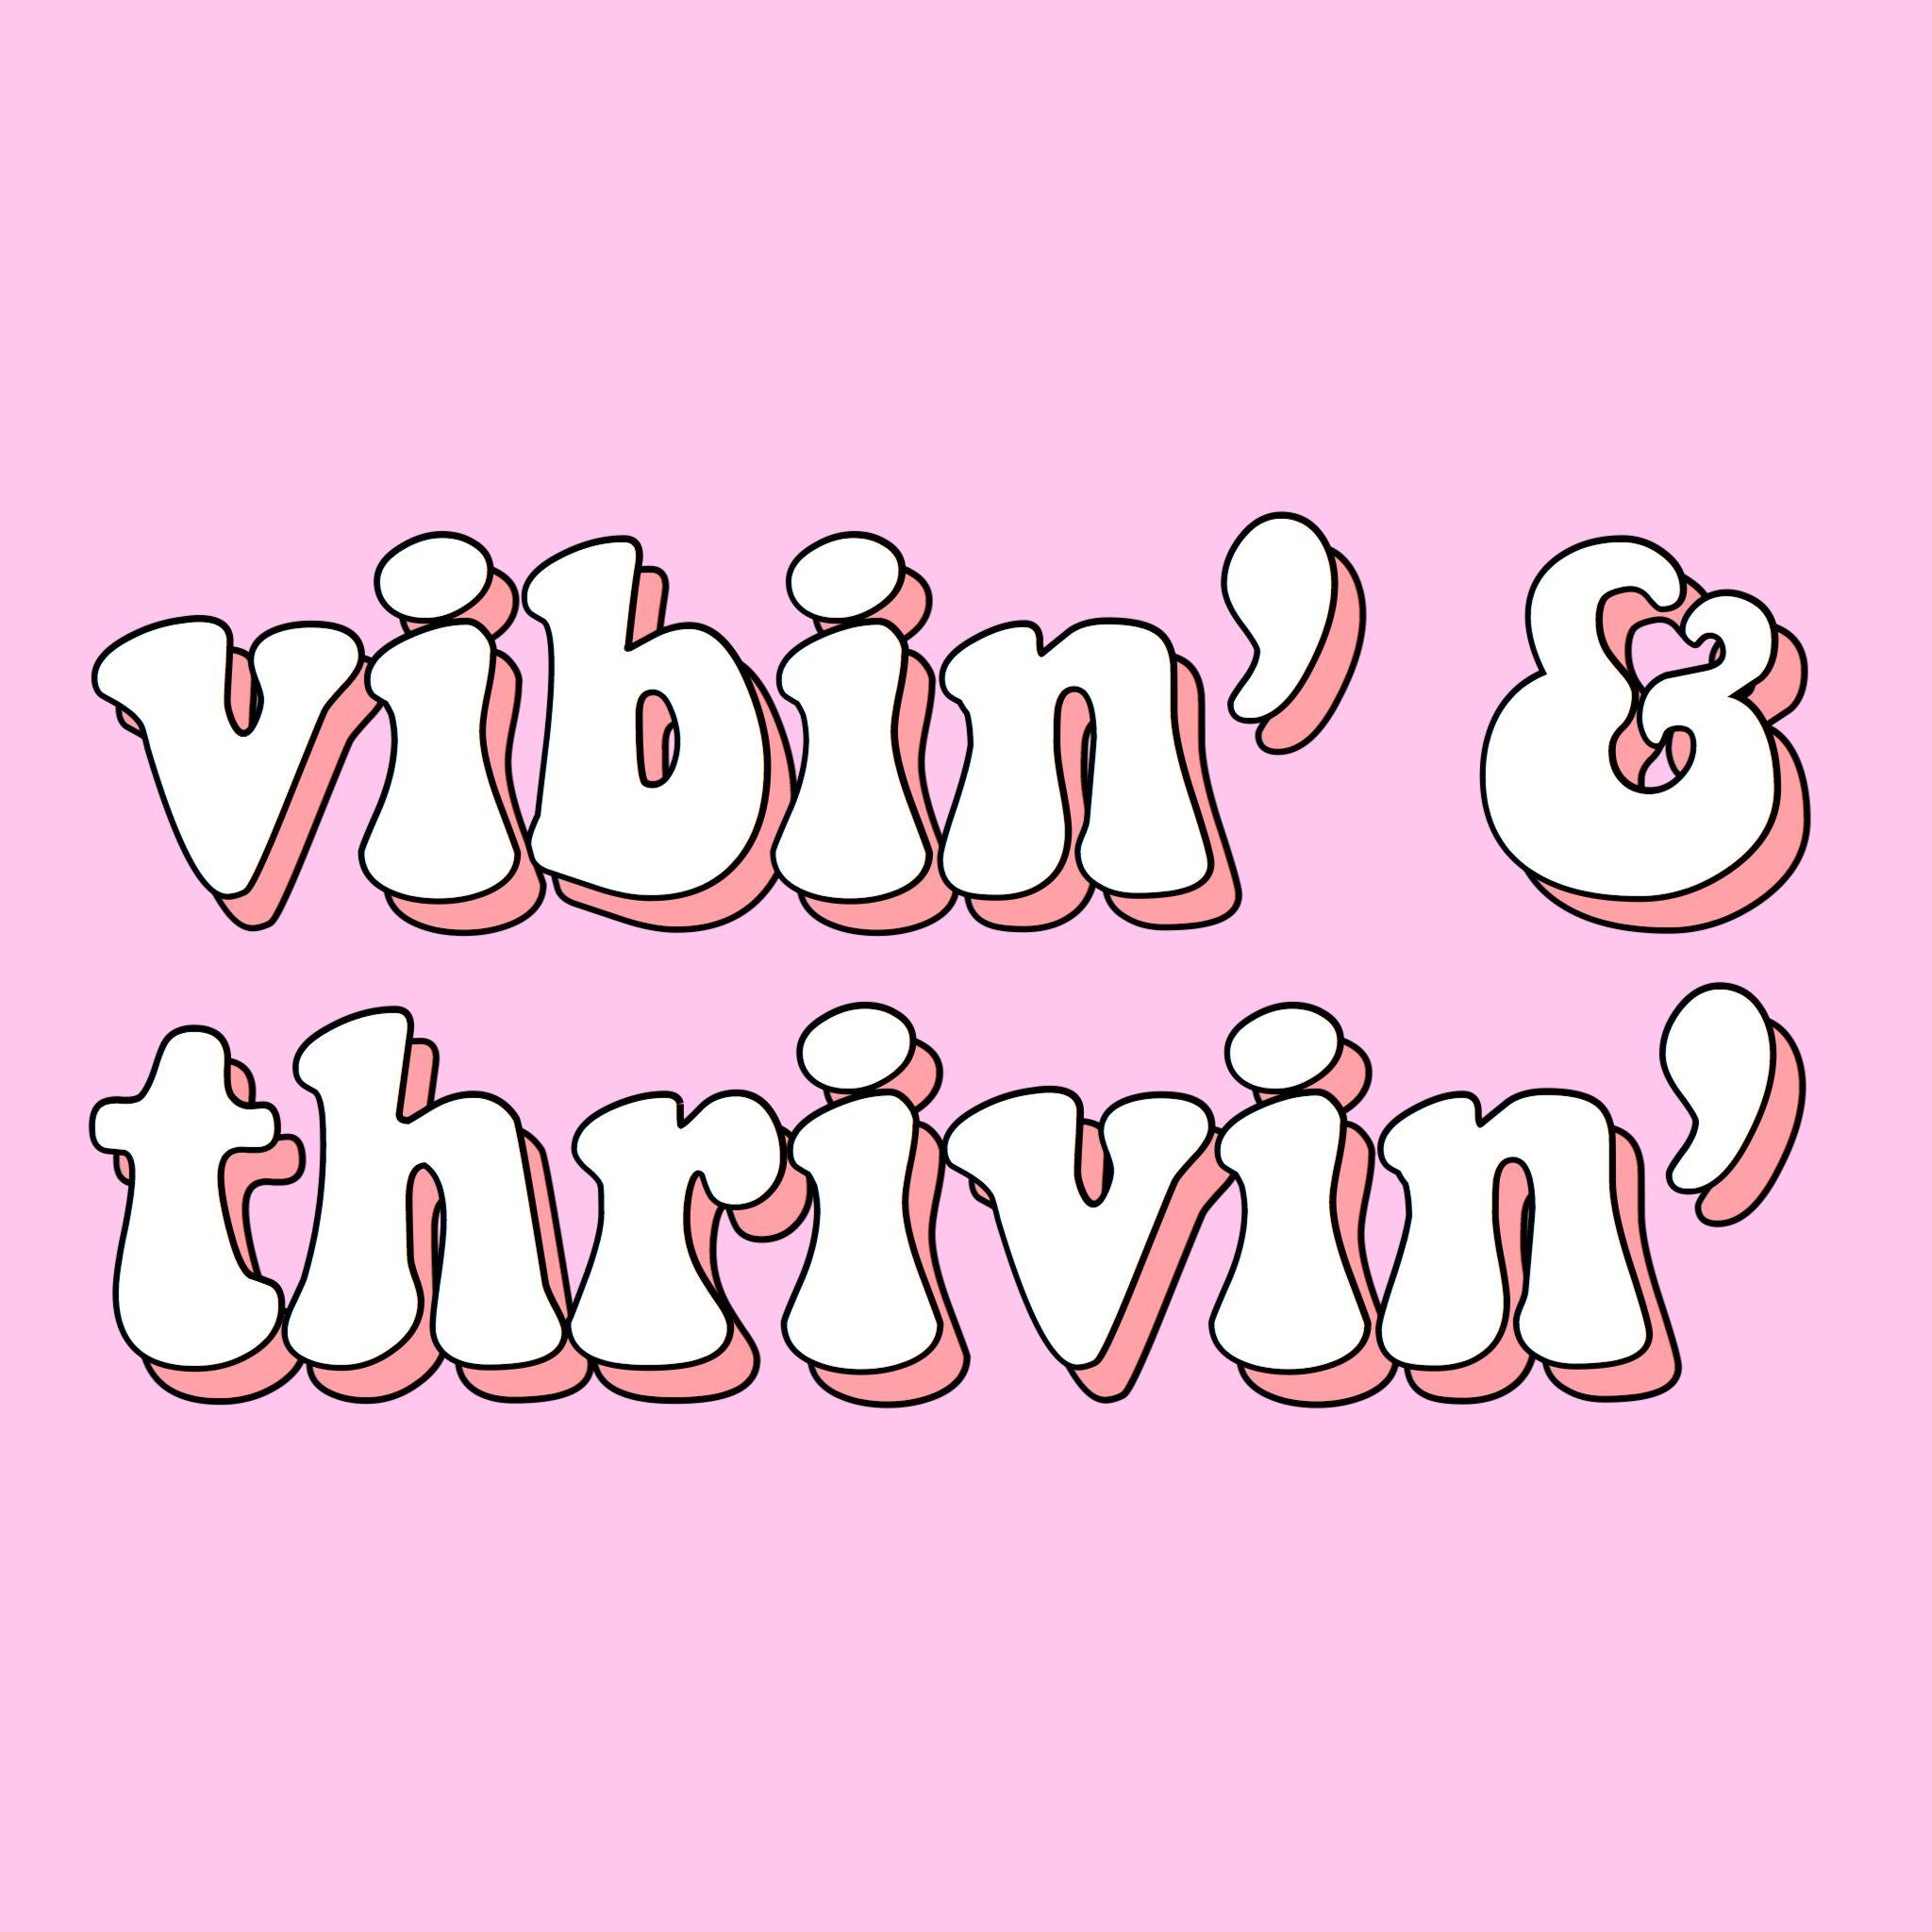 vibing and thriving background wallpaper quotes pink words happy